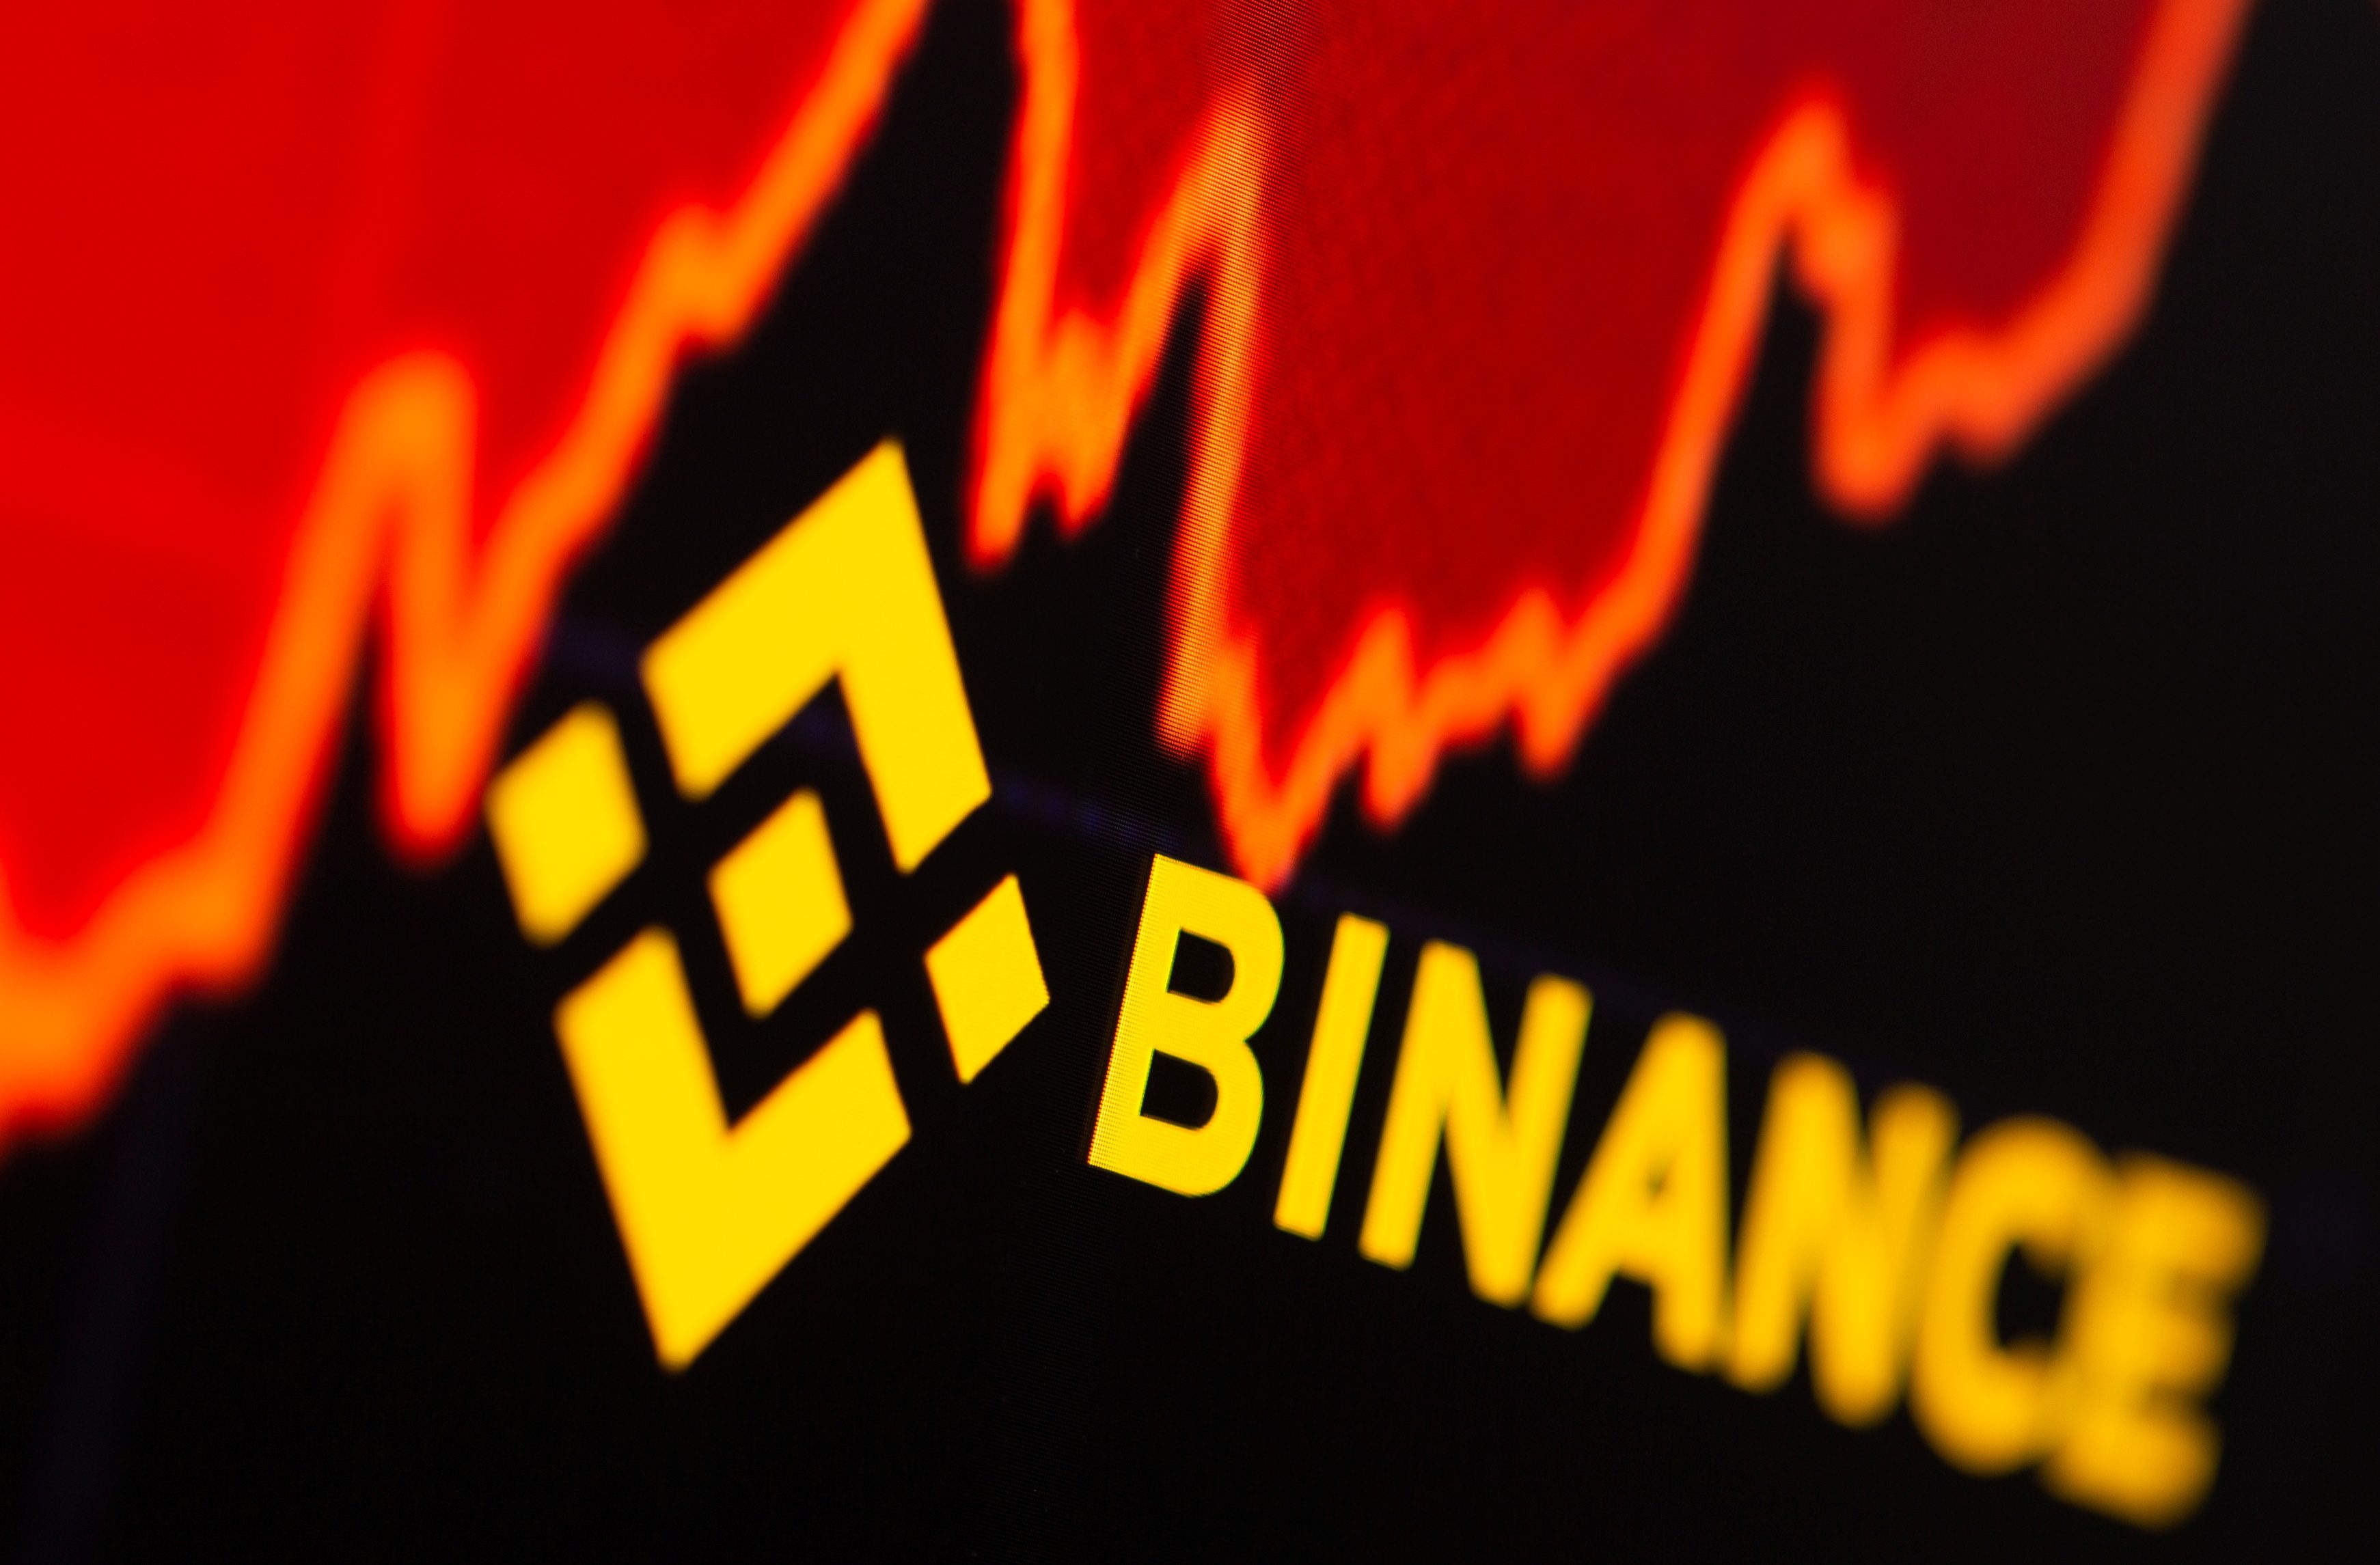 Britain bans Binance’s UK ops in latest cryptocurrency crackdown